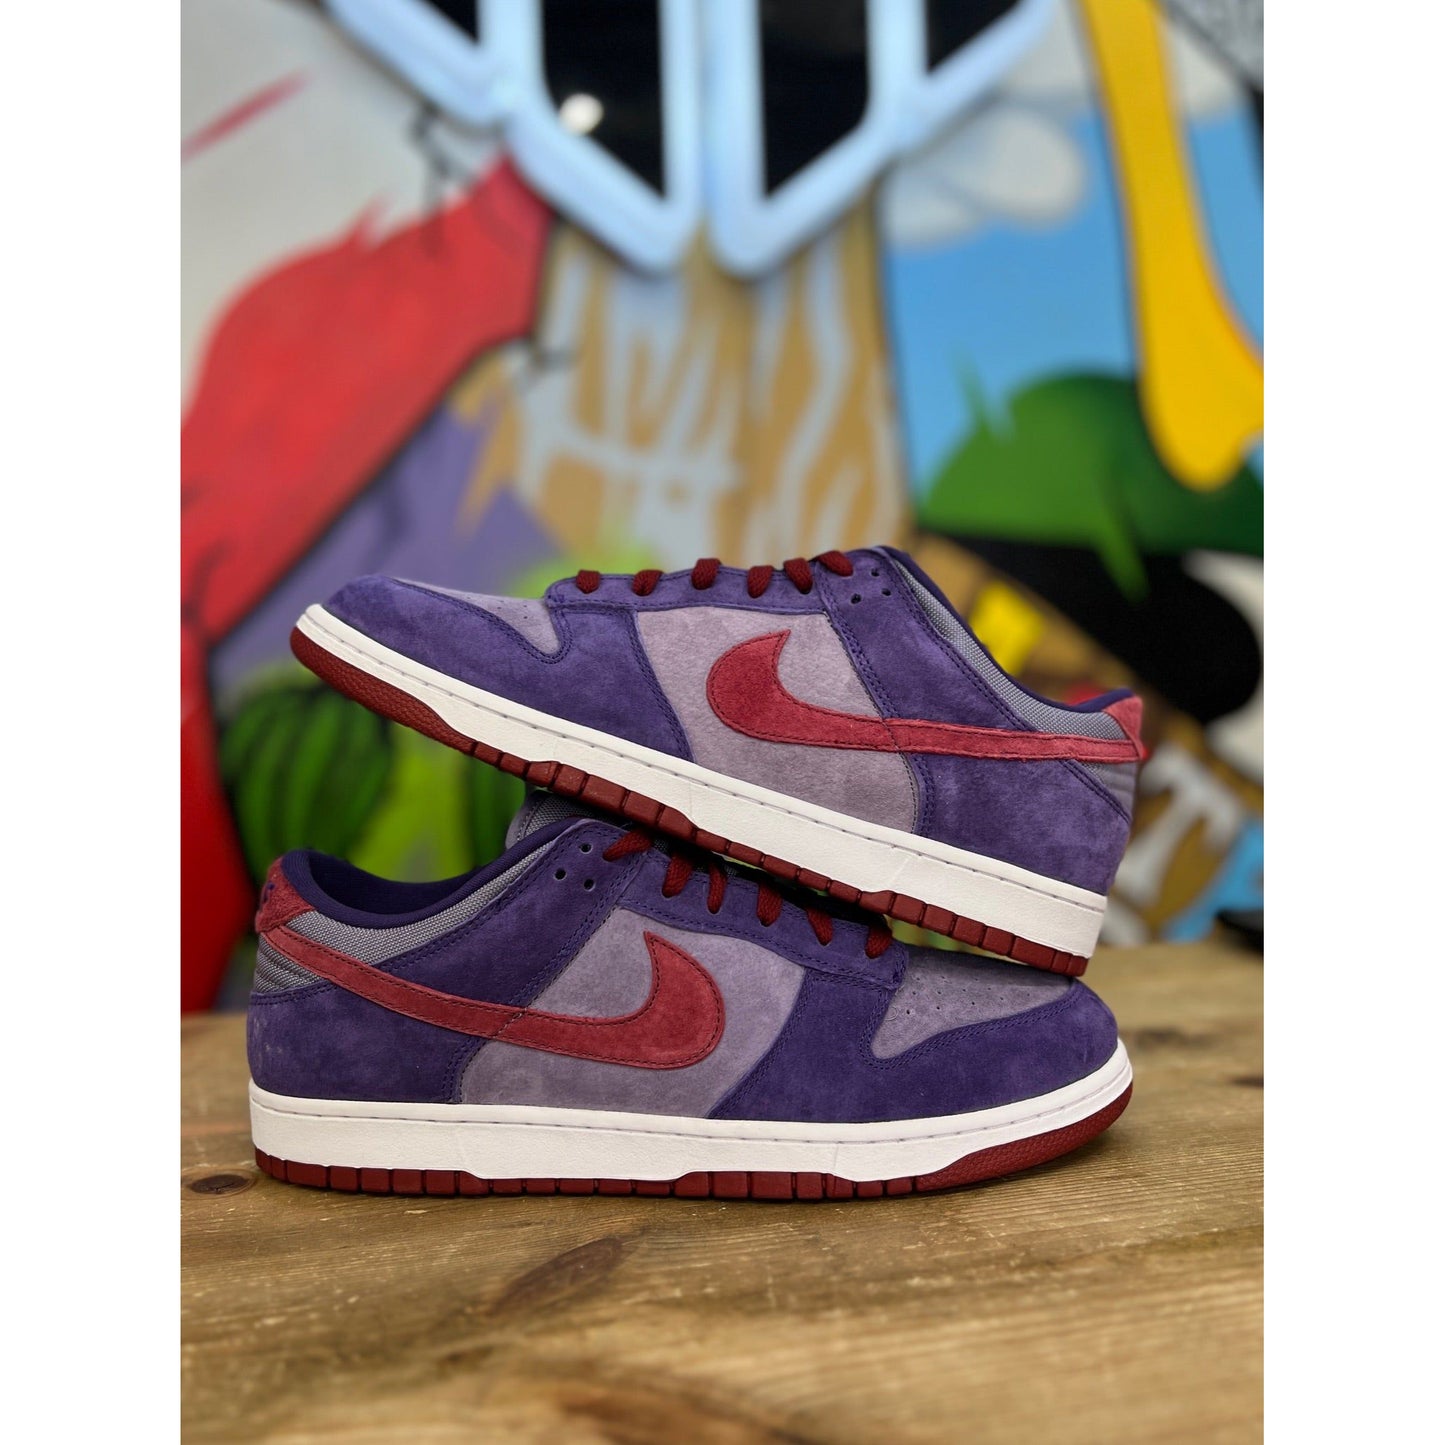 Nike Dunk Low Plum from Nike